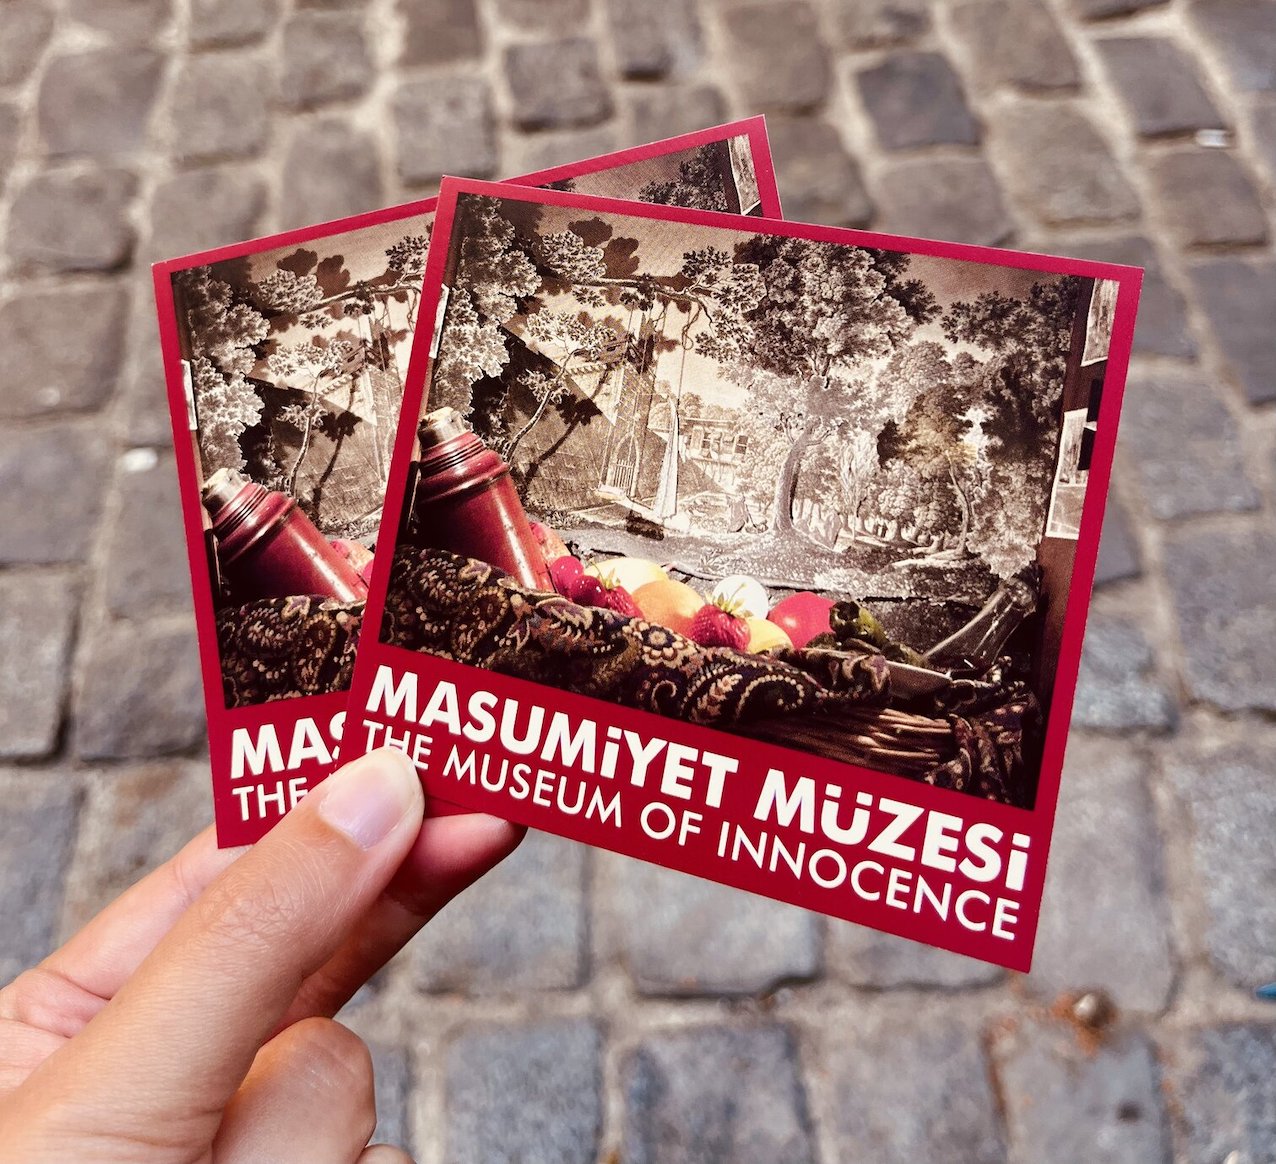 Tickets for the Museum of Innocence in Istanbul